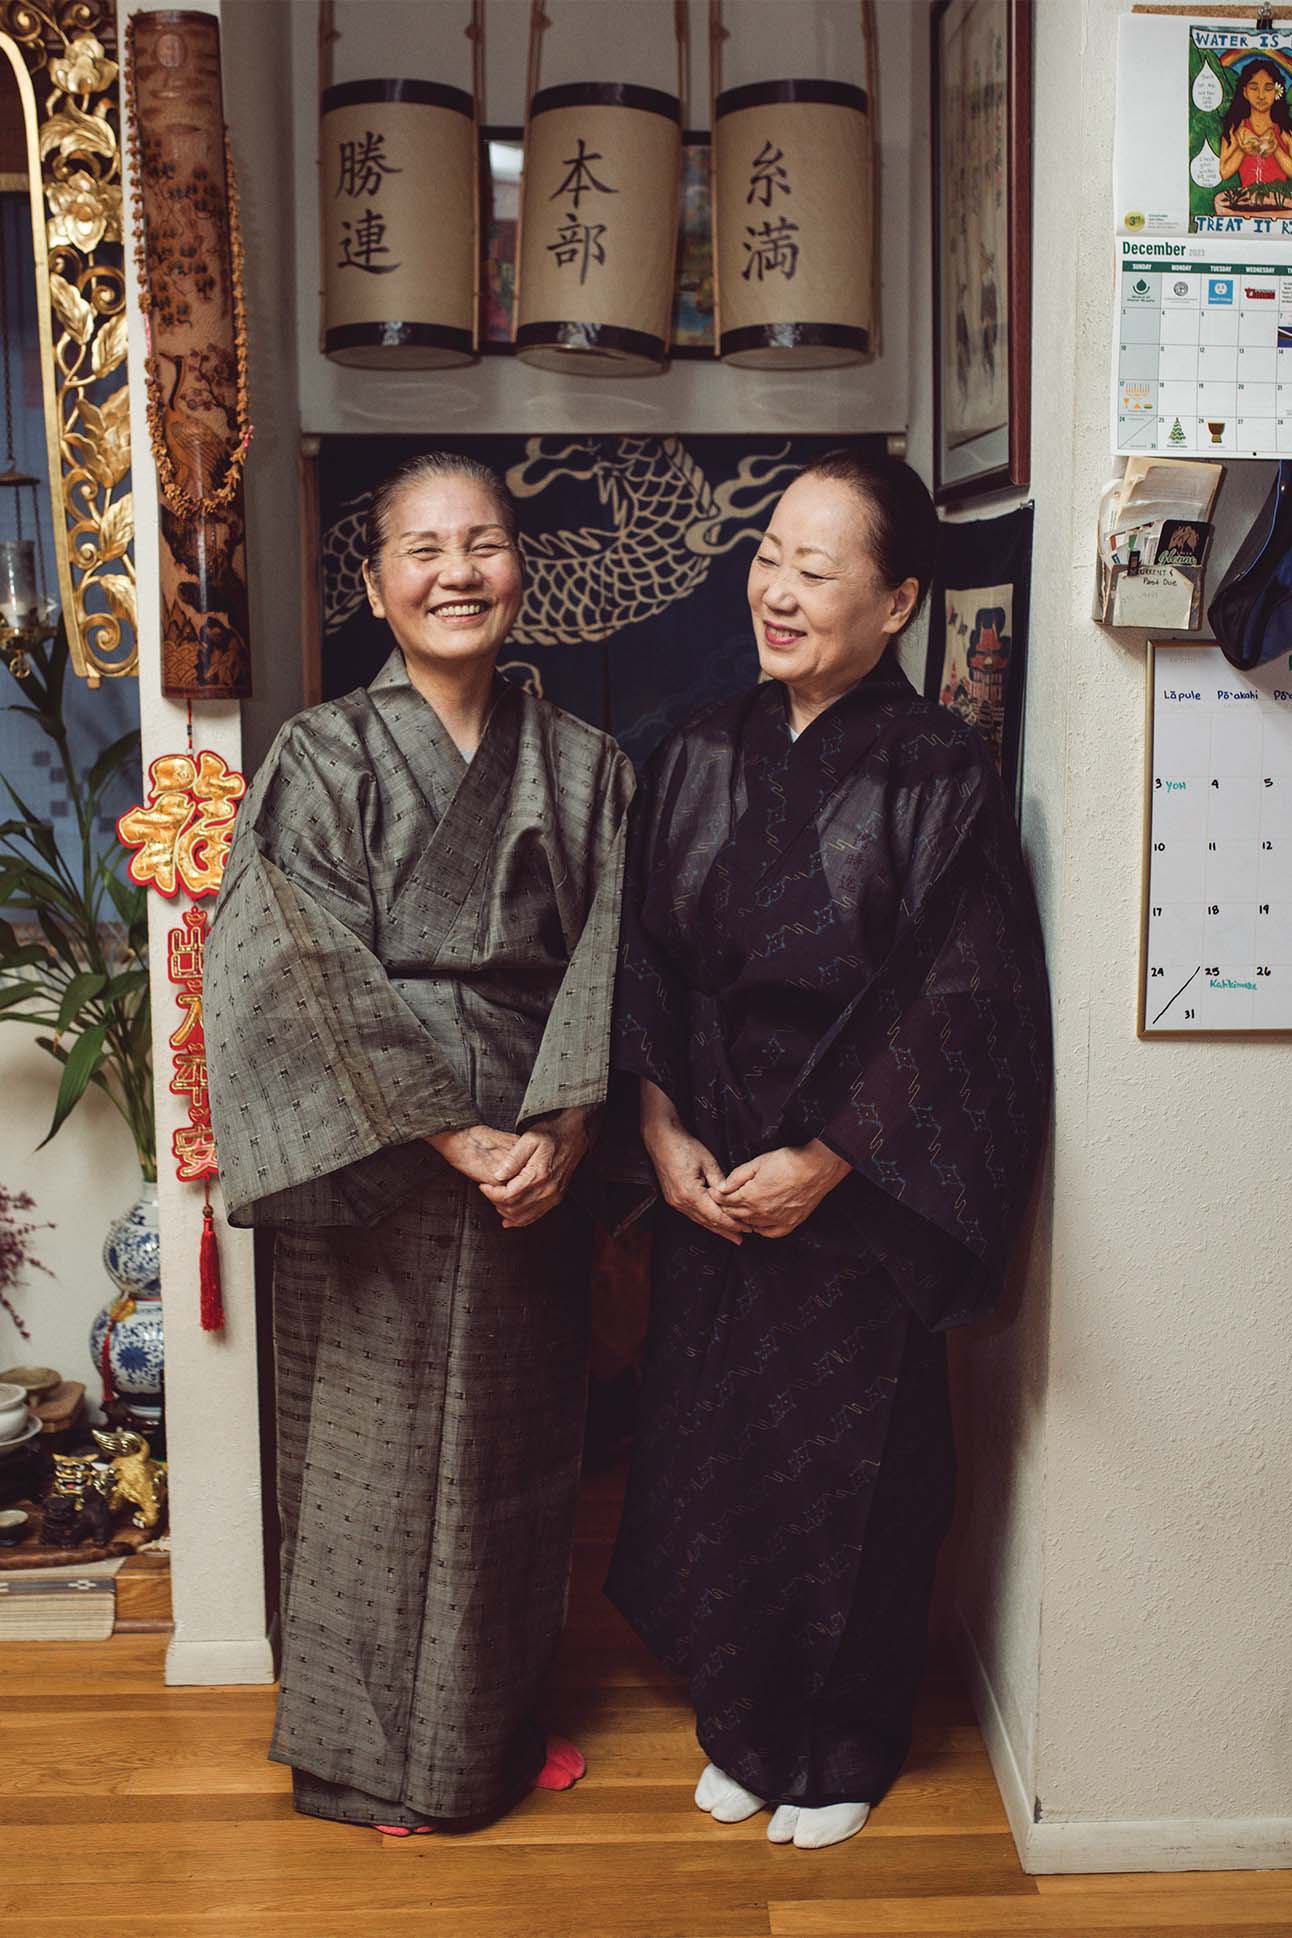 Two individuals wearing traditional Japanese kimonos standing in a room with cultural decorations, including hanging scrolls with Japanese writing, a wall calendar, and a red Chinese knot ornament. The room also features various ornamental objects and a peek into an adjacent area with a bamboo scroll painting.